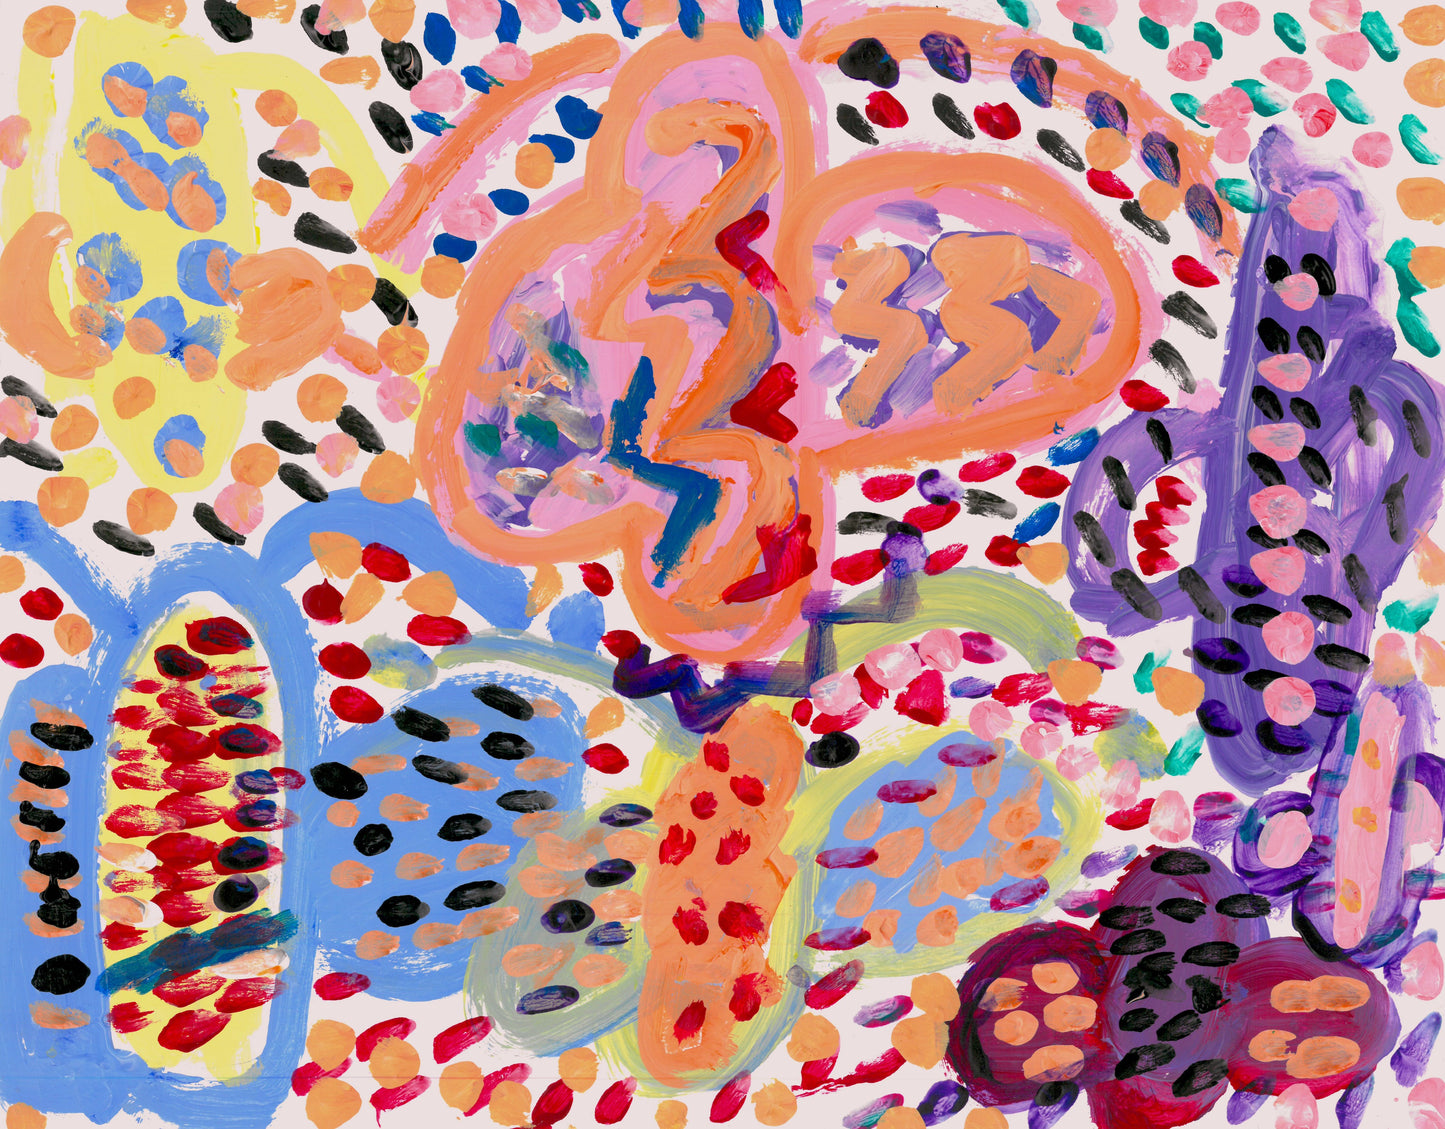 This is a painting with a white background, several abstract shapes and multicolored dots covering everything. Colors include orange, purple, red, blue, yellow, black, white.